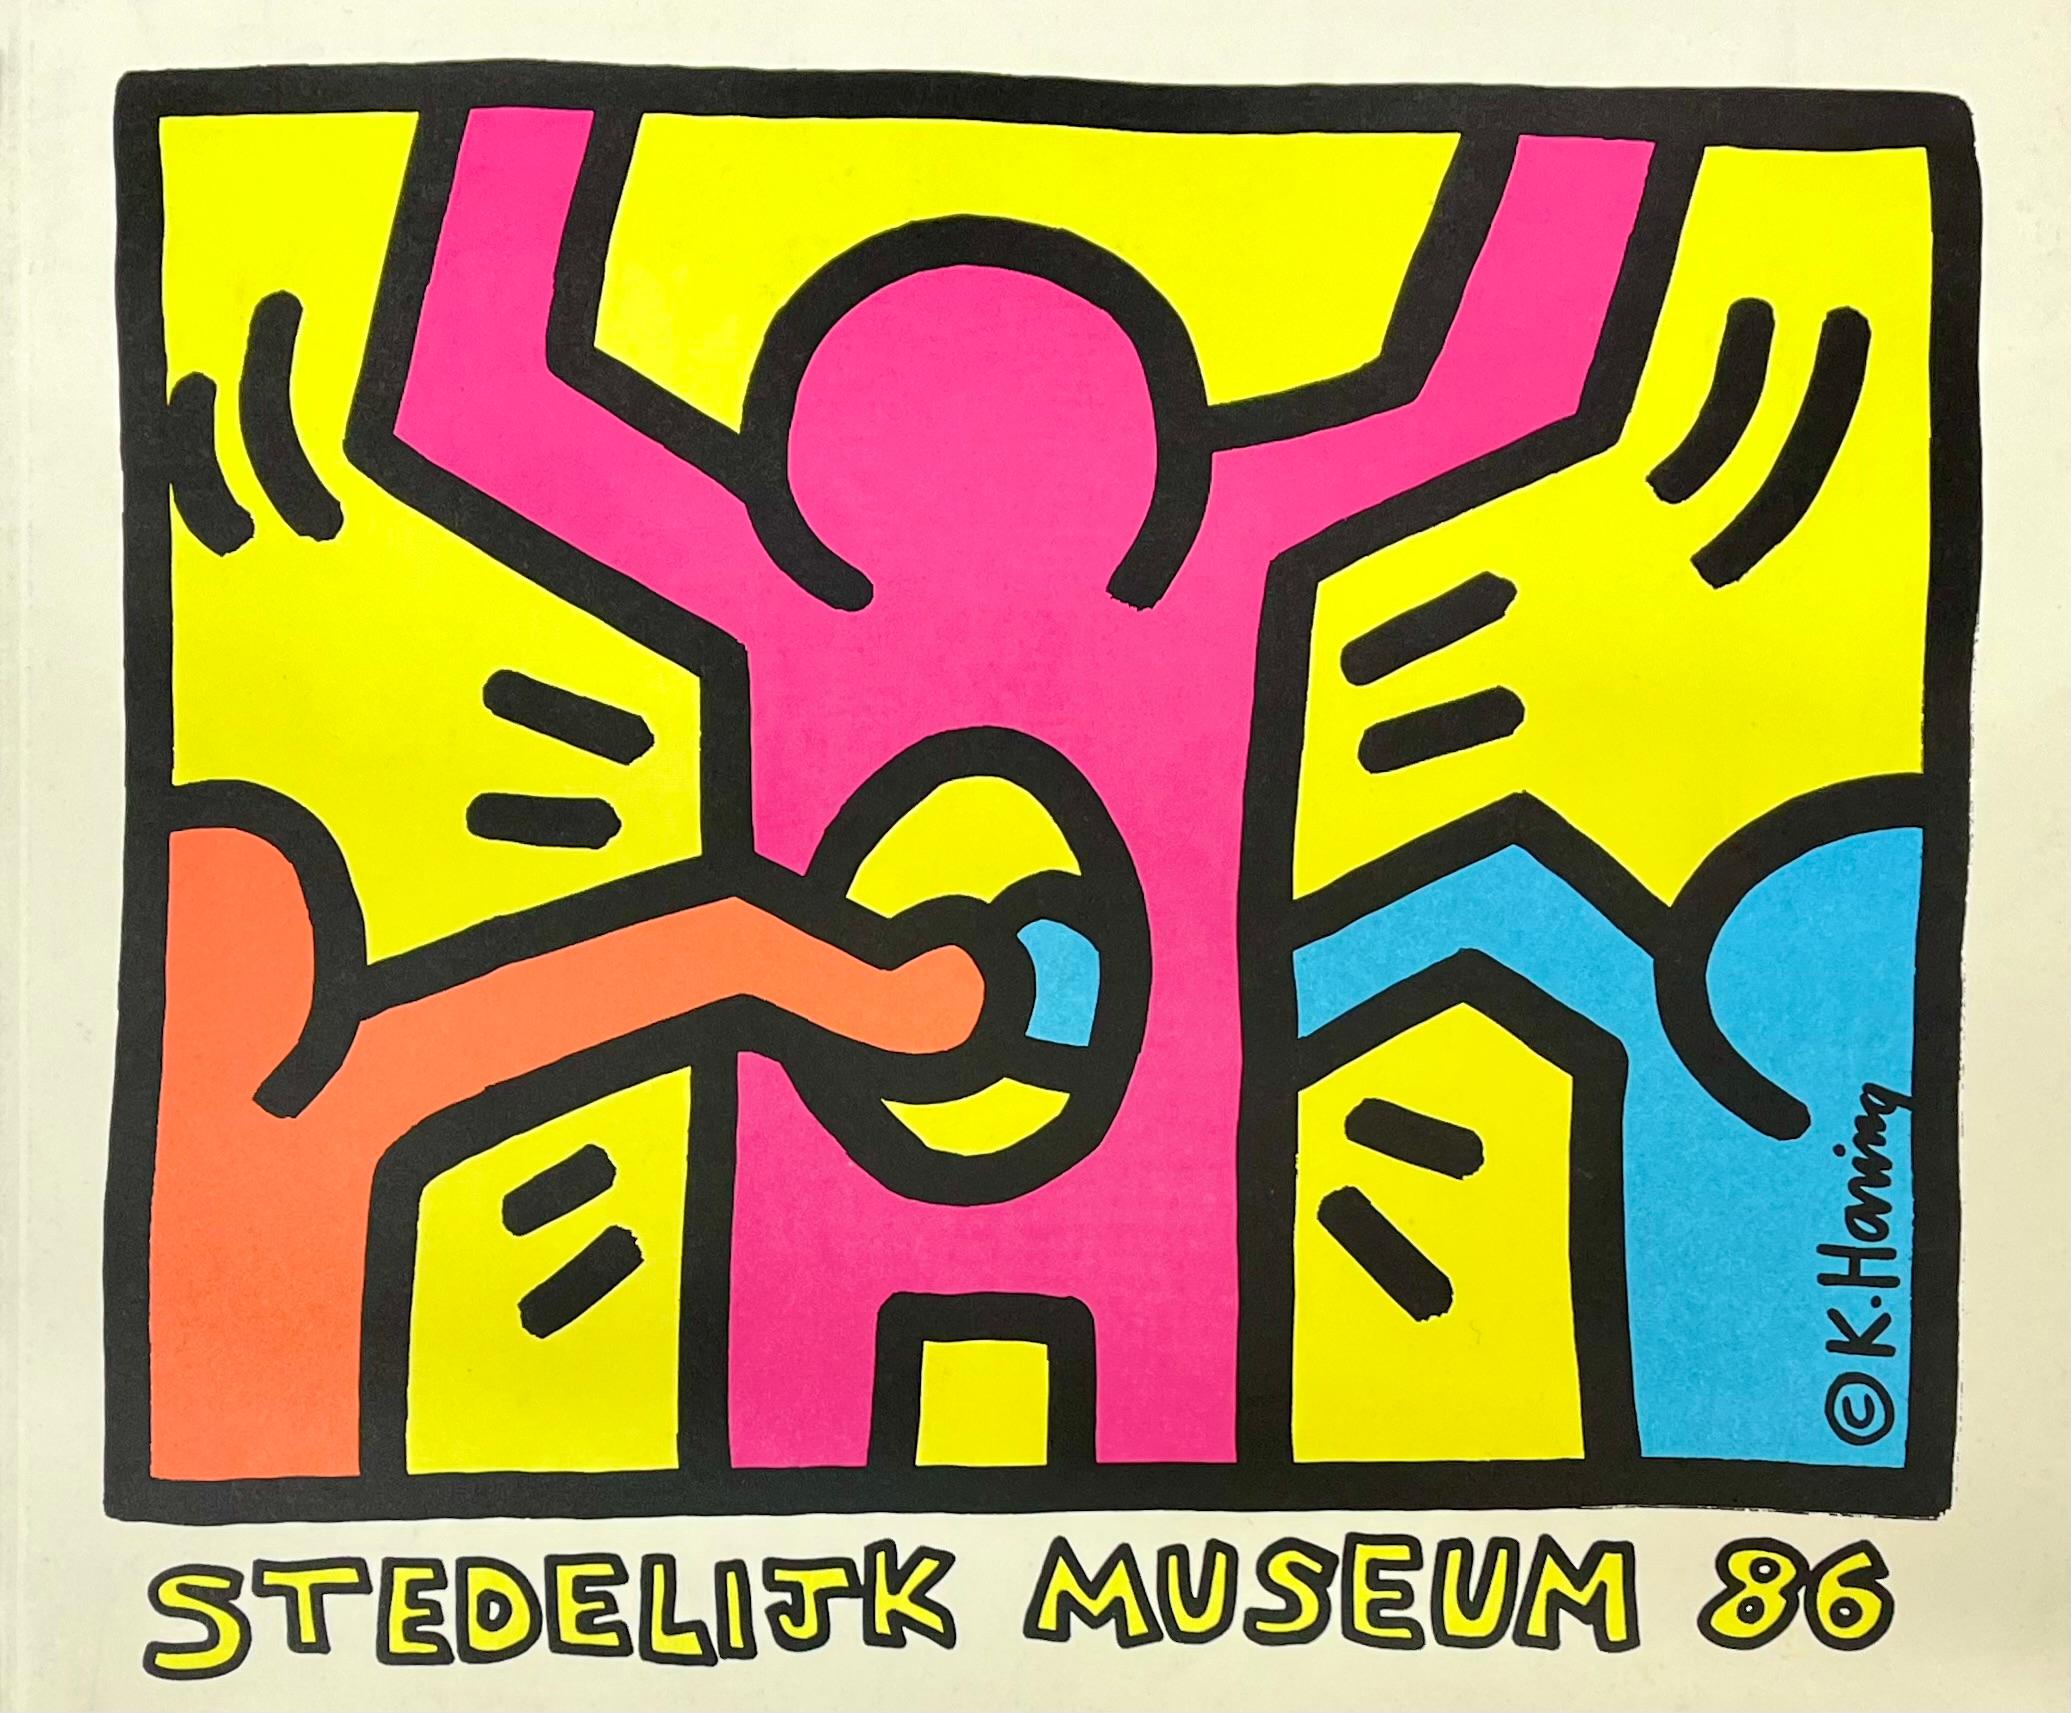 Keith Haring Stedelijk Museum 1986 (Keith Haring 1986 exhibition catalog) - Photograph by (after) Keith Haring